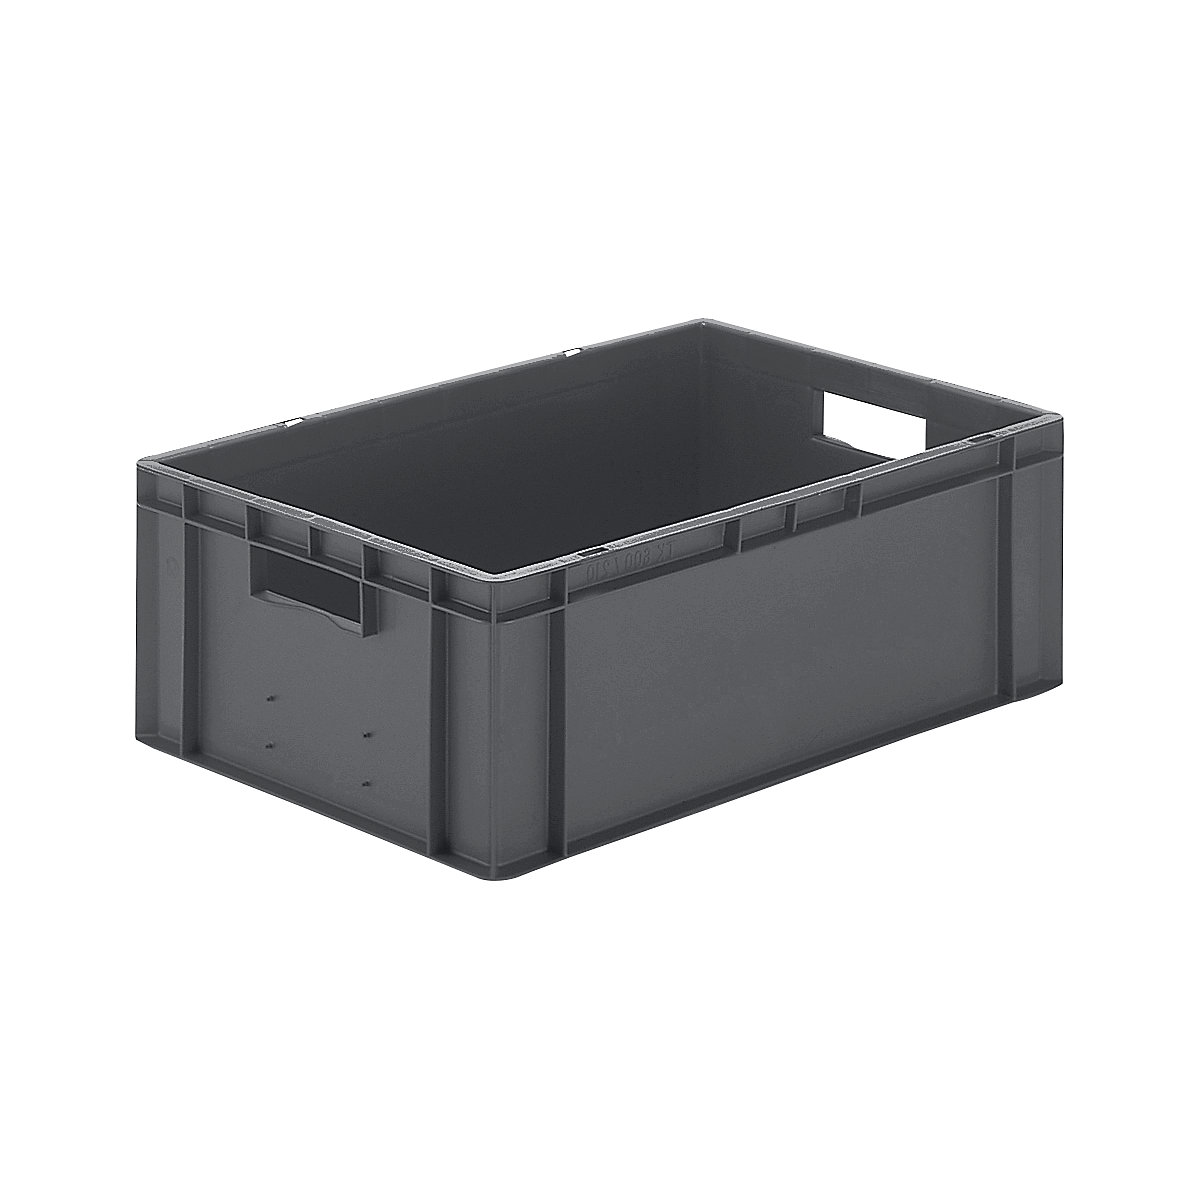 Euro stacking container, closed walls and base, LxWxH 600 x 400 x 210 mm, grey, pack of 5-5